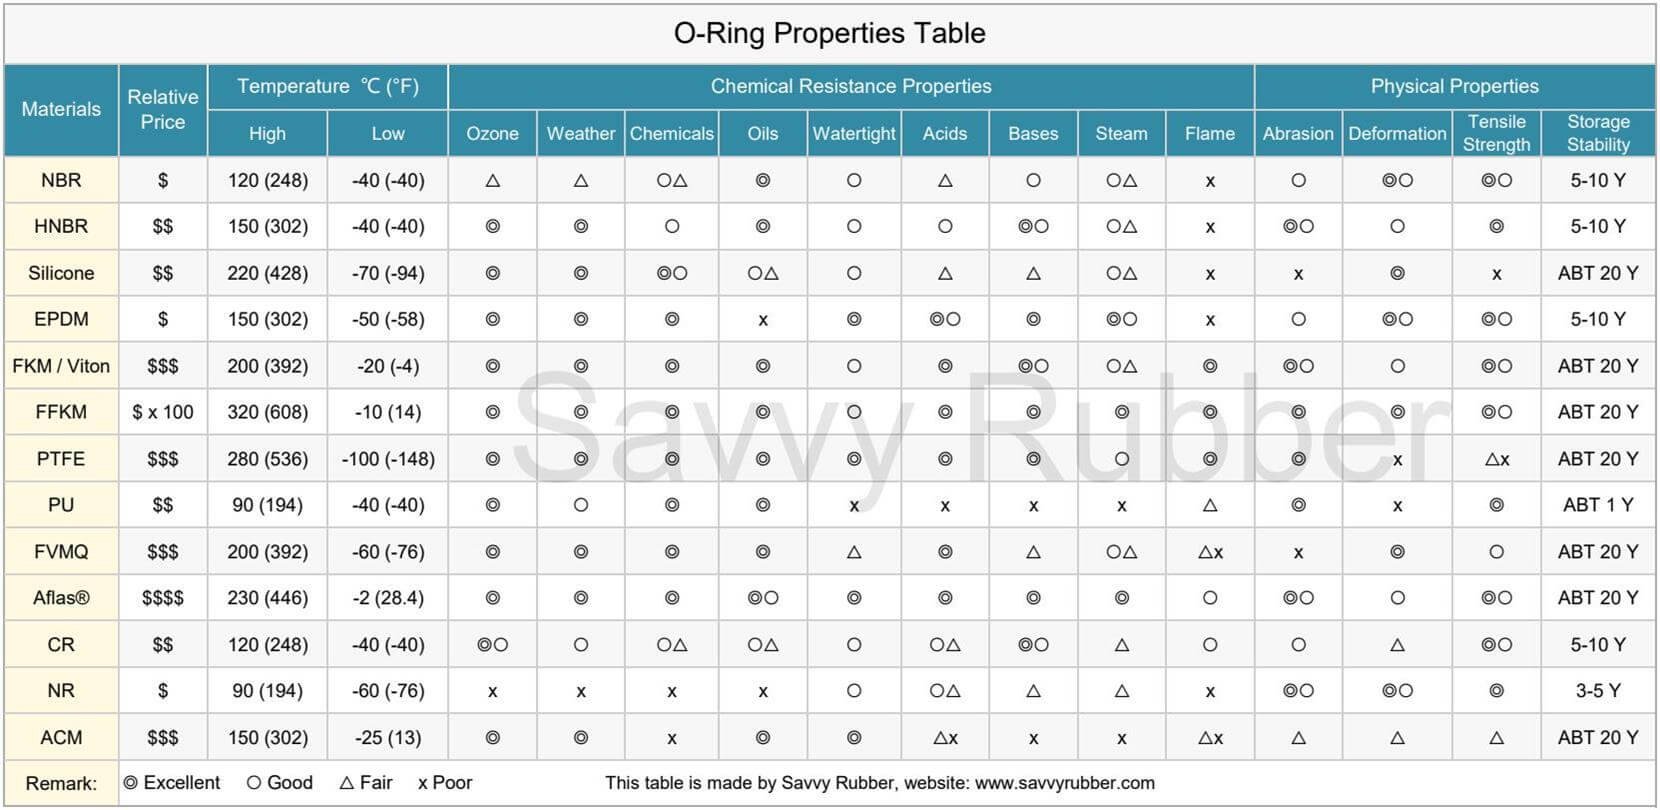 O-Ring Properties Table